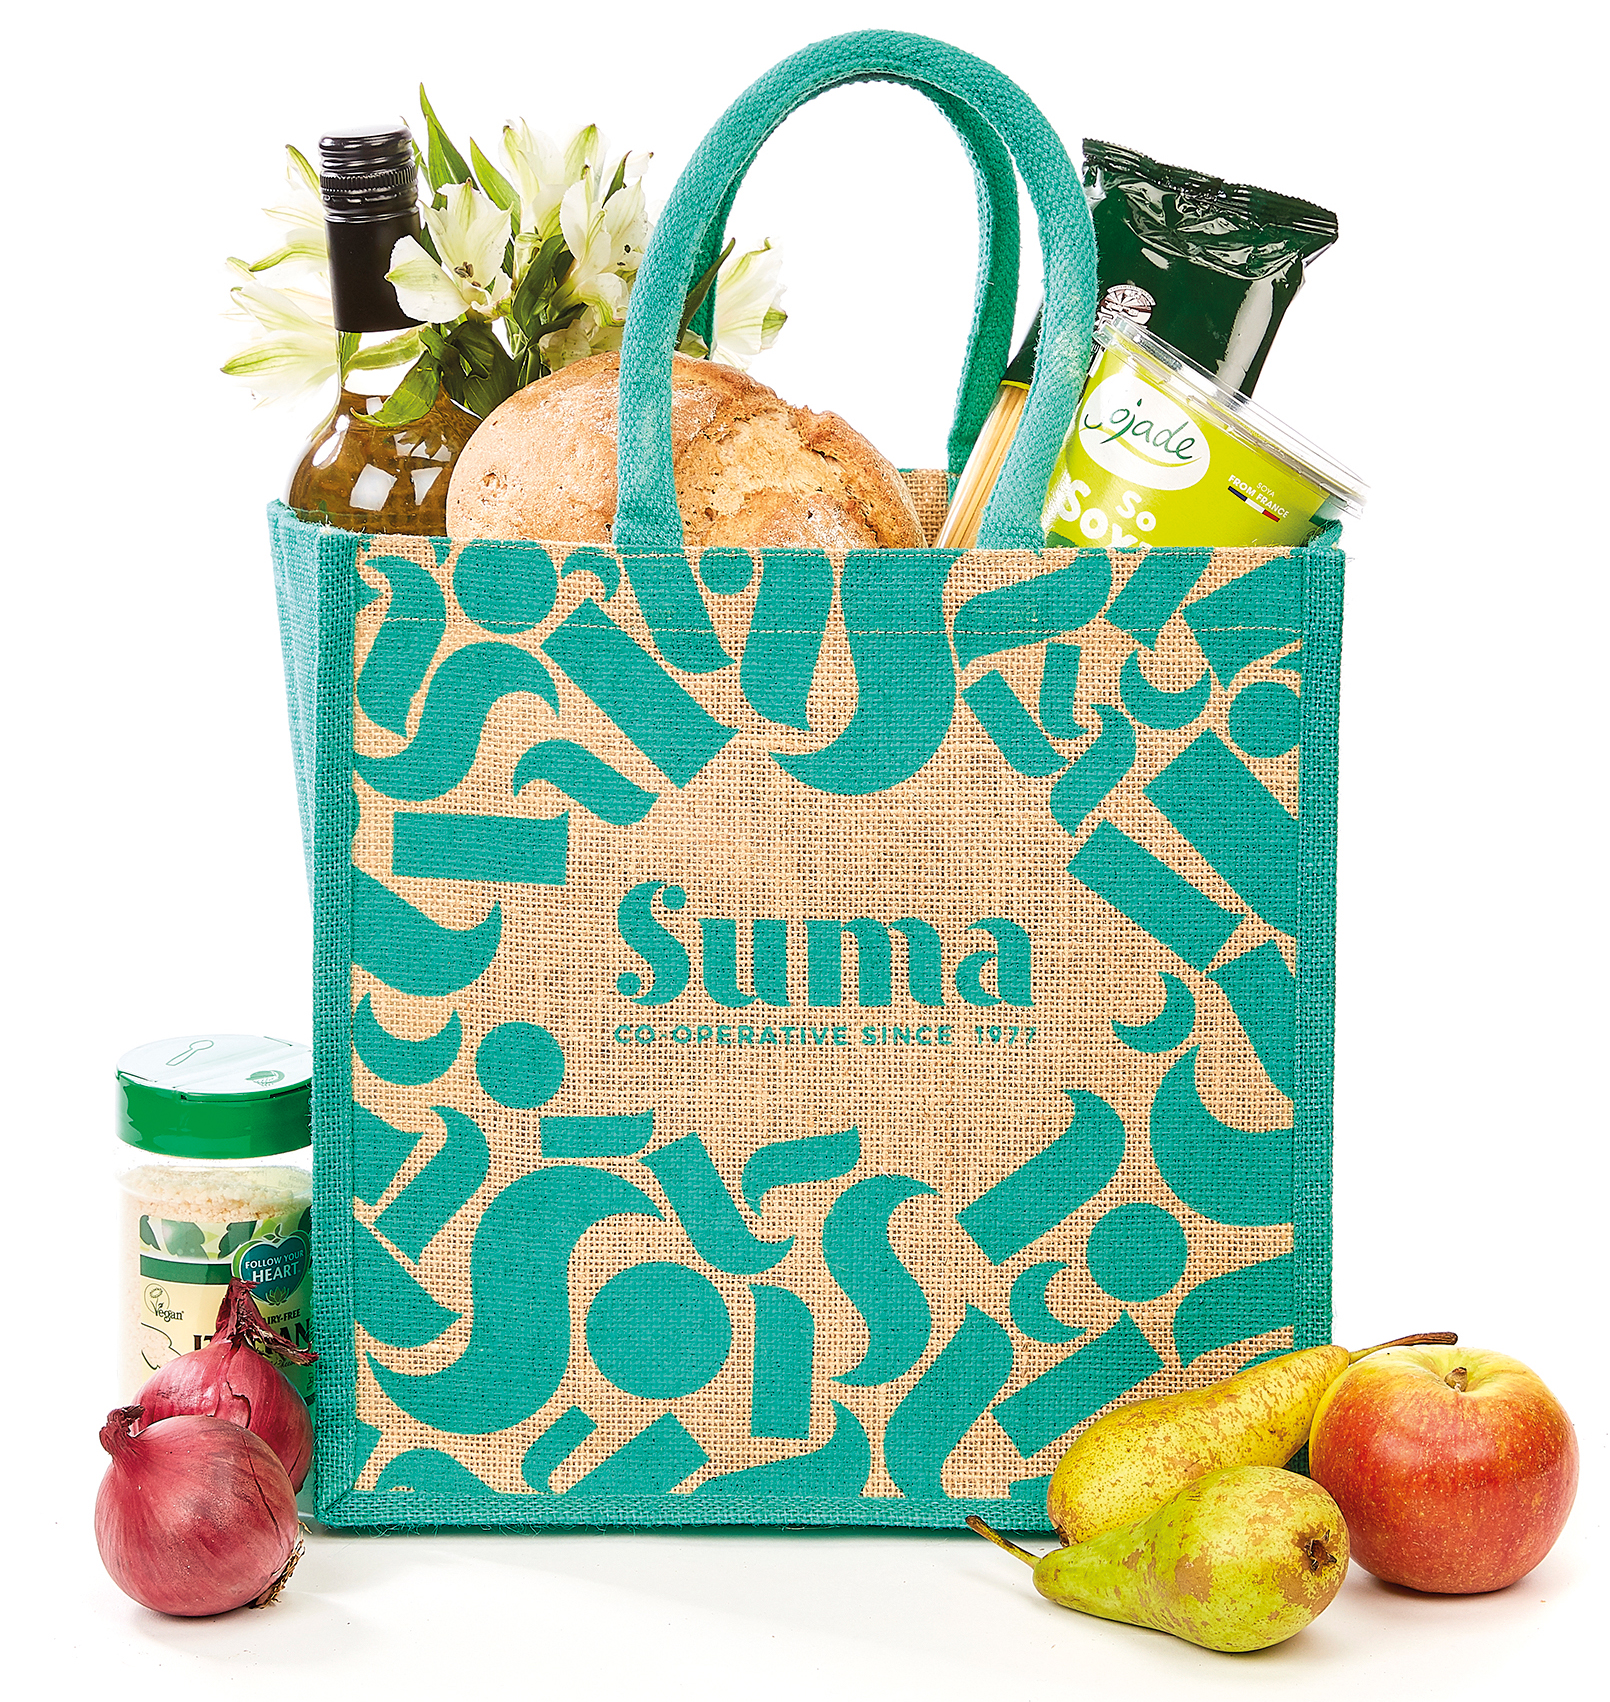 A Suma shopping bag with the new branding